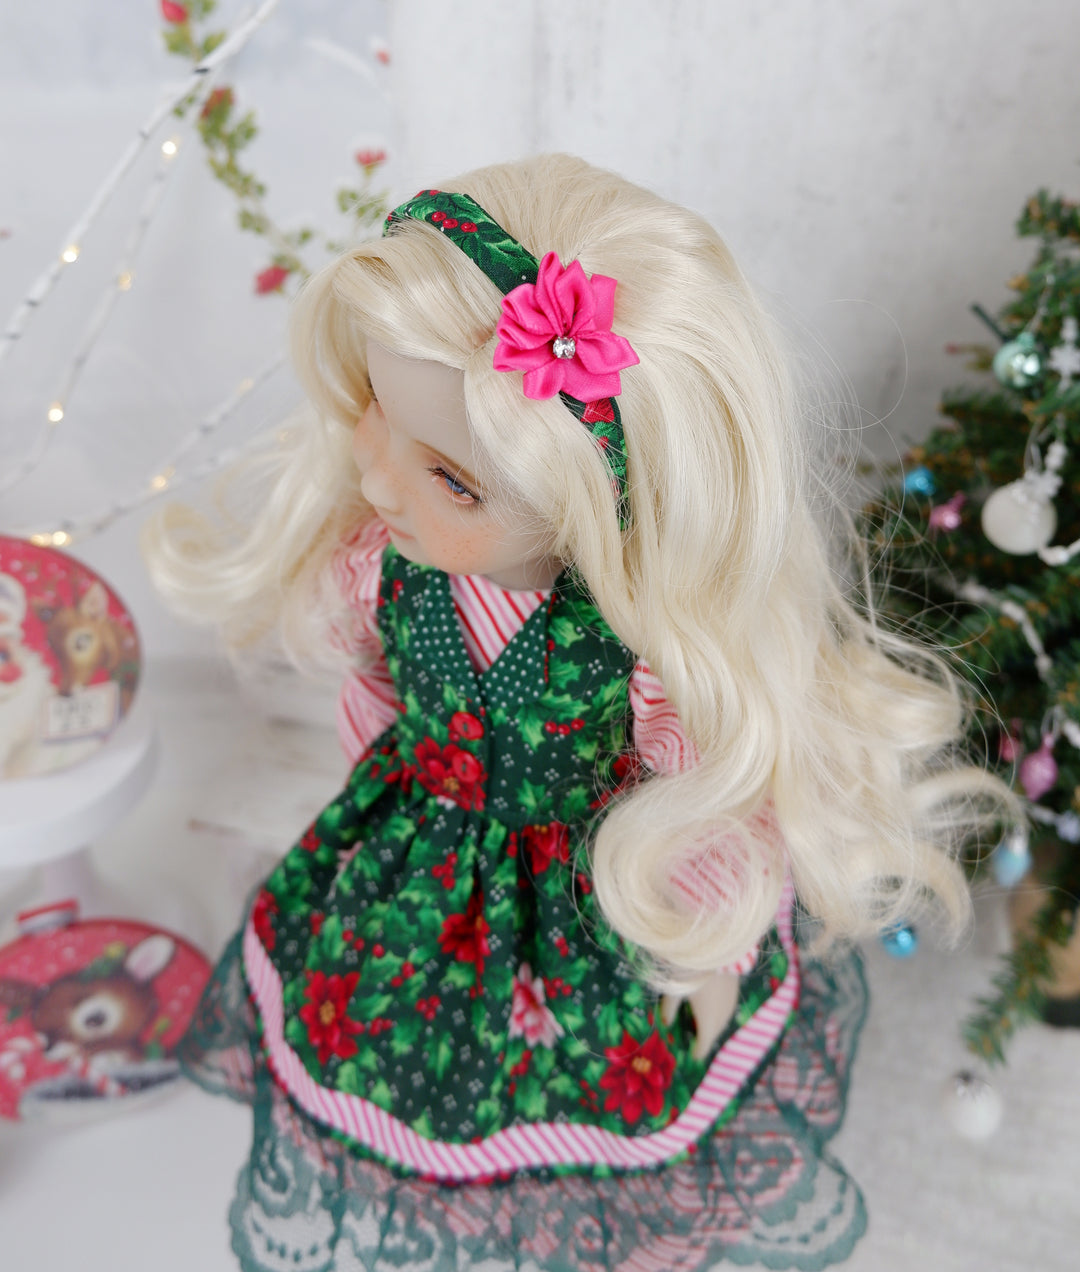 Christmas Poinsettias - dress & pinafore with boots for Ruby Red Fashion Friends doll